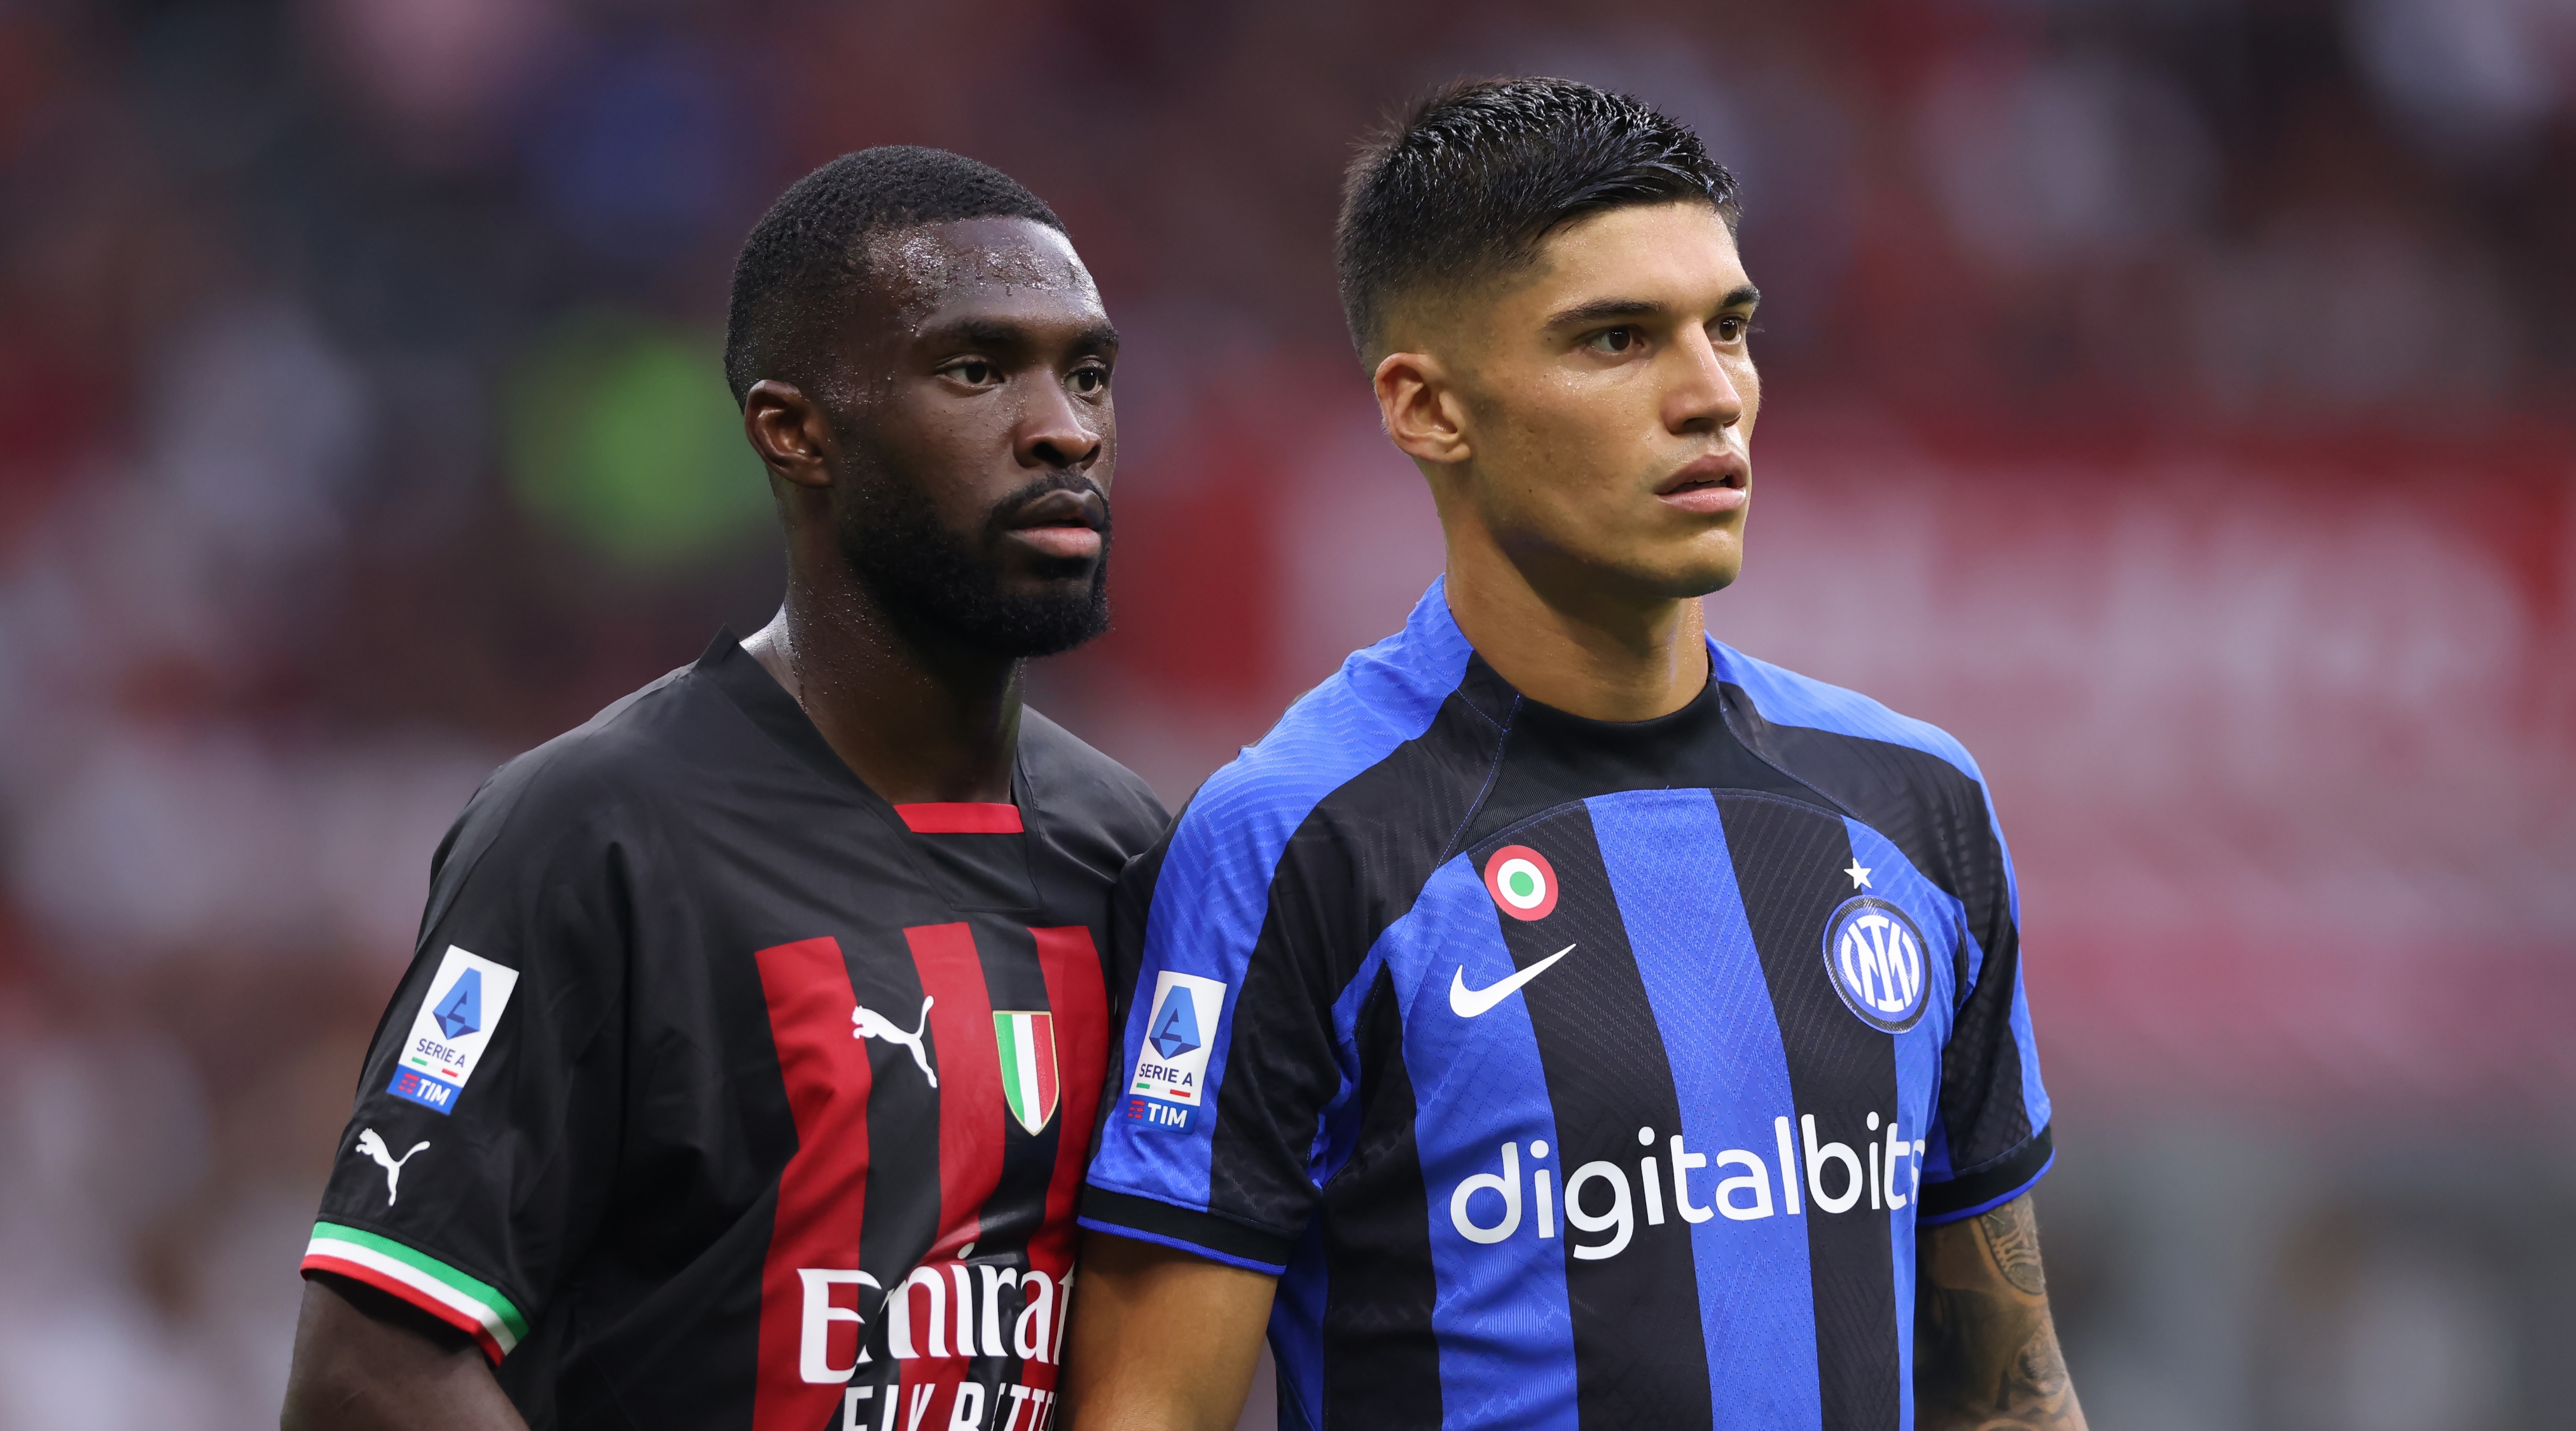 AC Milan vs Inter Milan live stream, match preview, team news and kick-off time for this Italian Super Cup match FourFourTwo